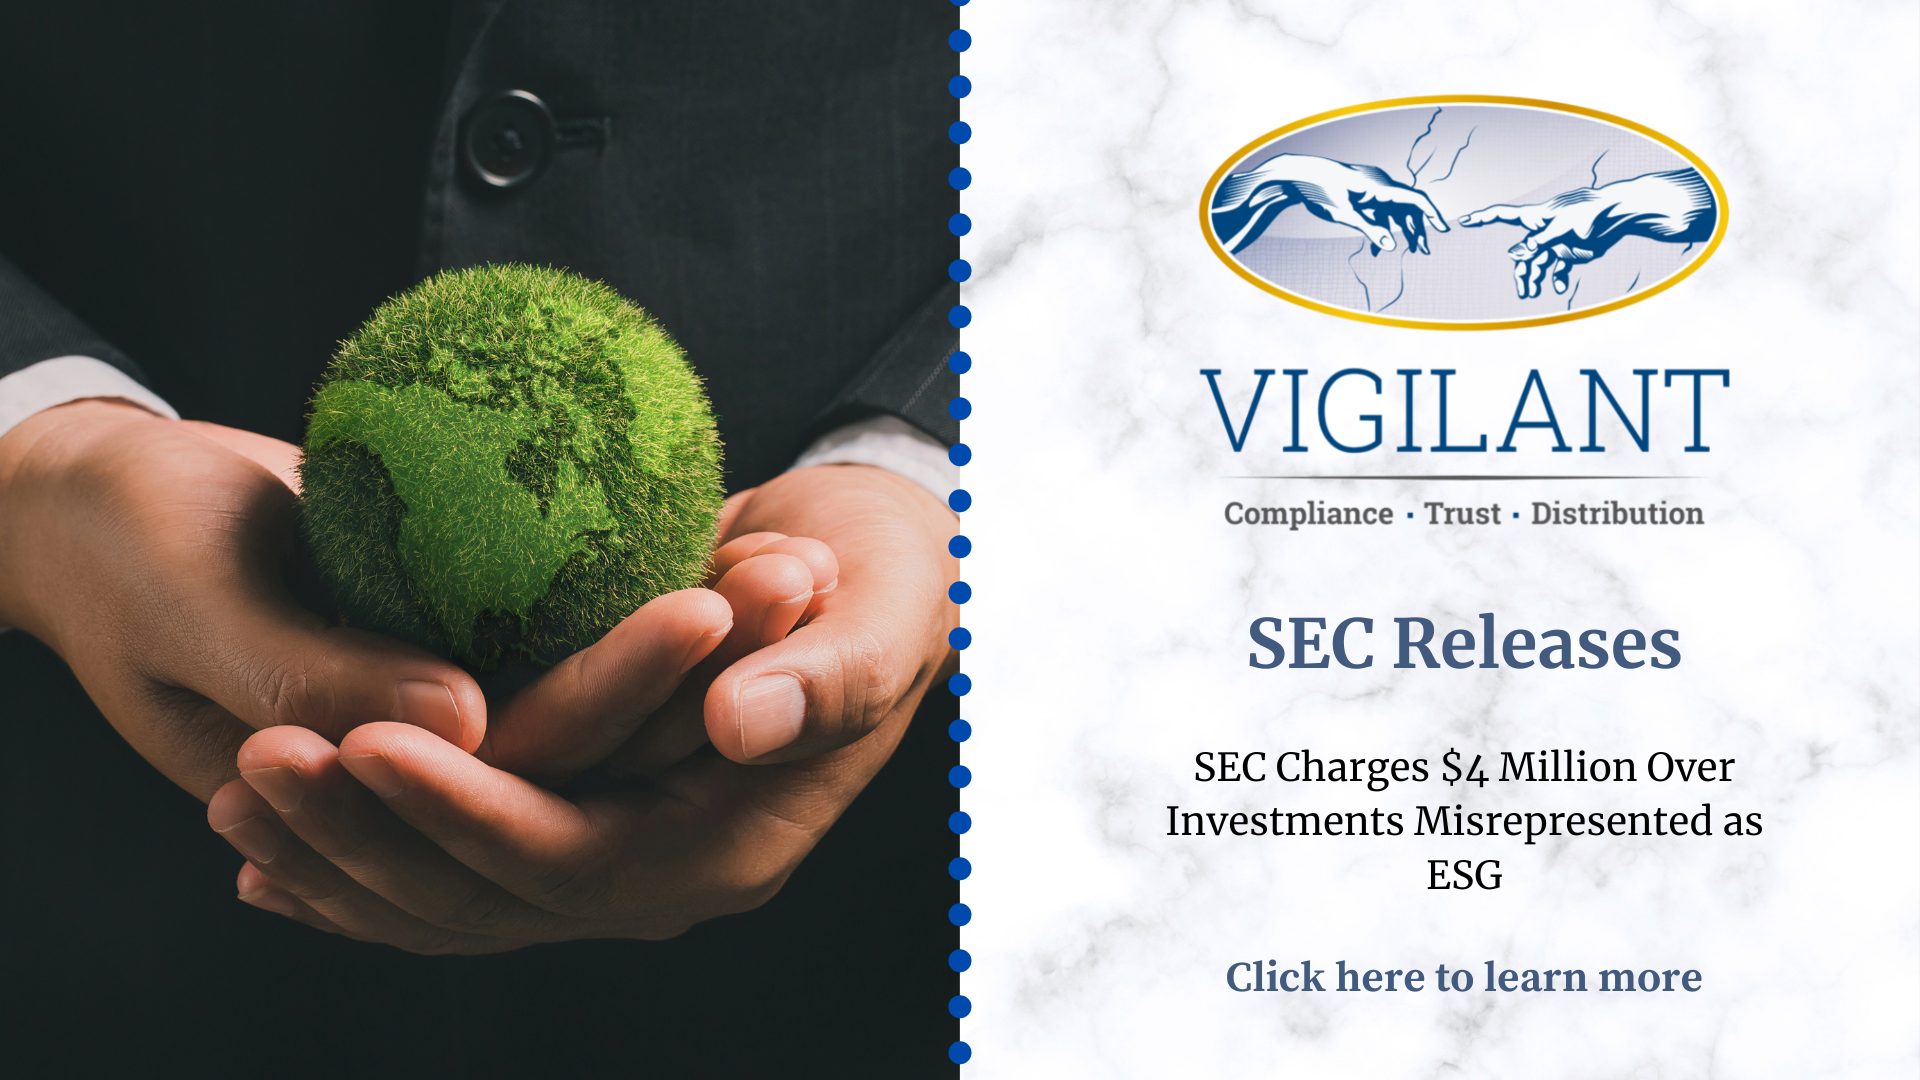 SEC Charges $4 Million Over Investments Misrepresented as ESG